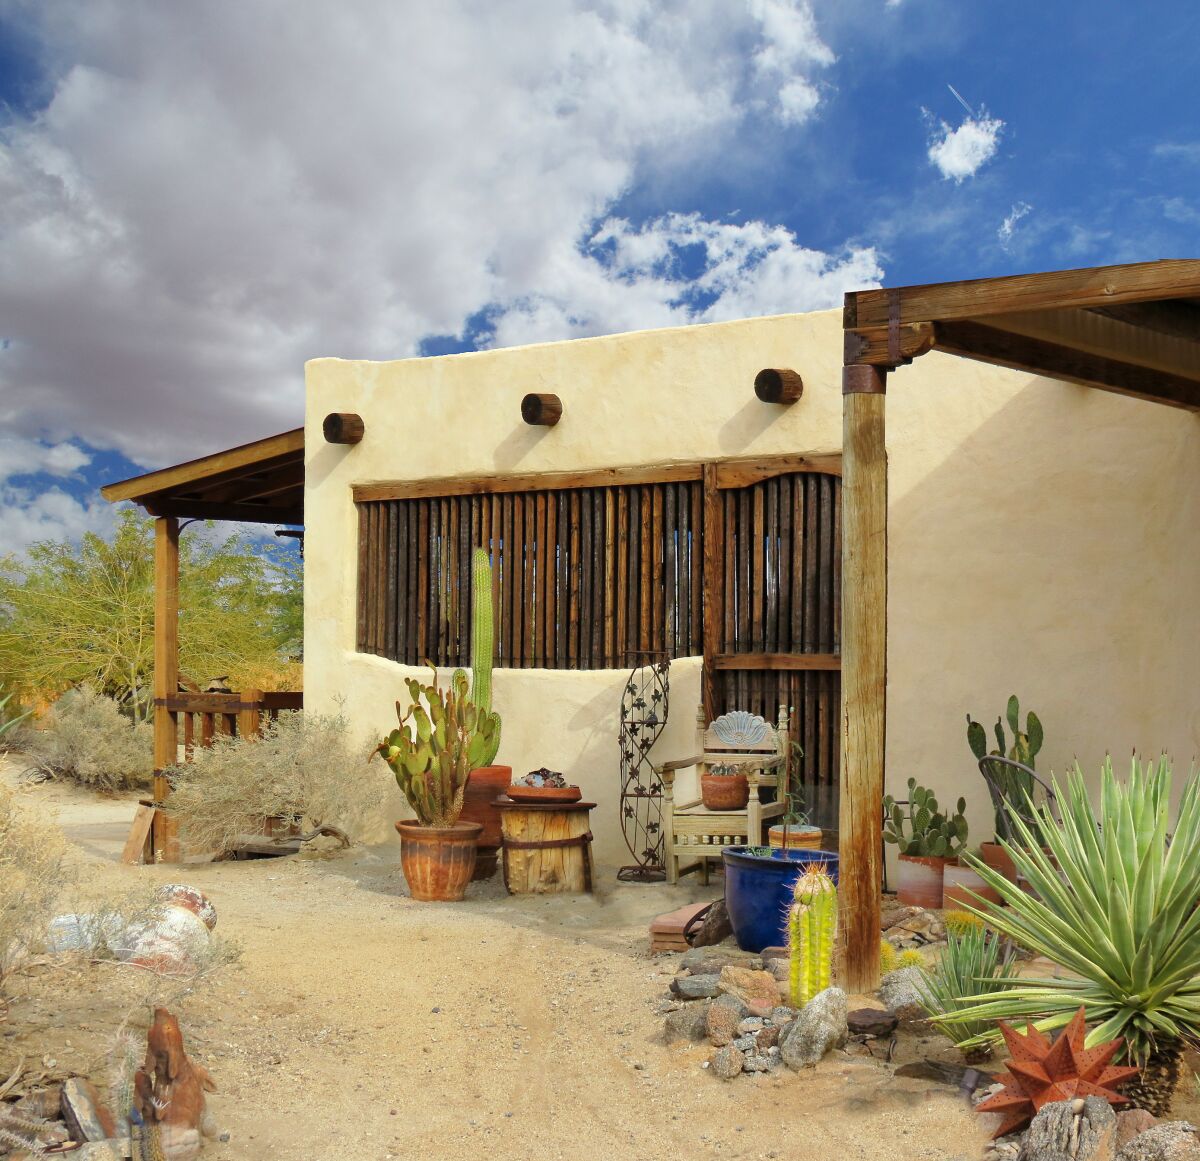 A Southwest home in the desert has handcrafted wooden posts and beams, and metal yard art mixed with yucca and cacti.